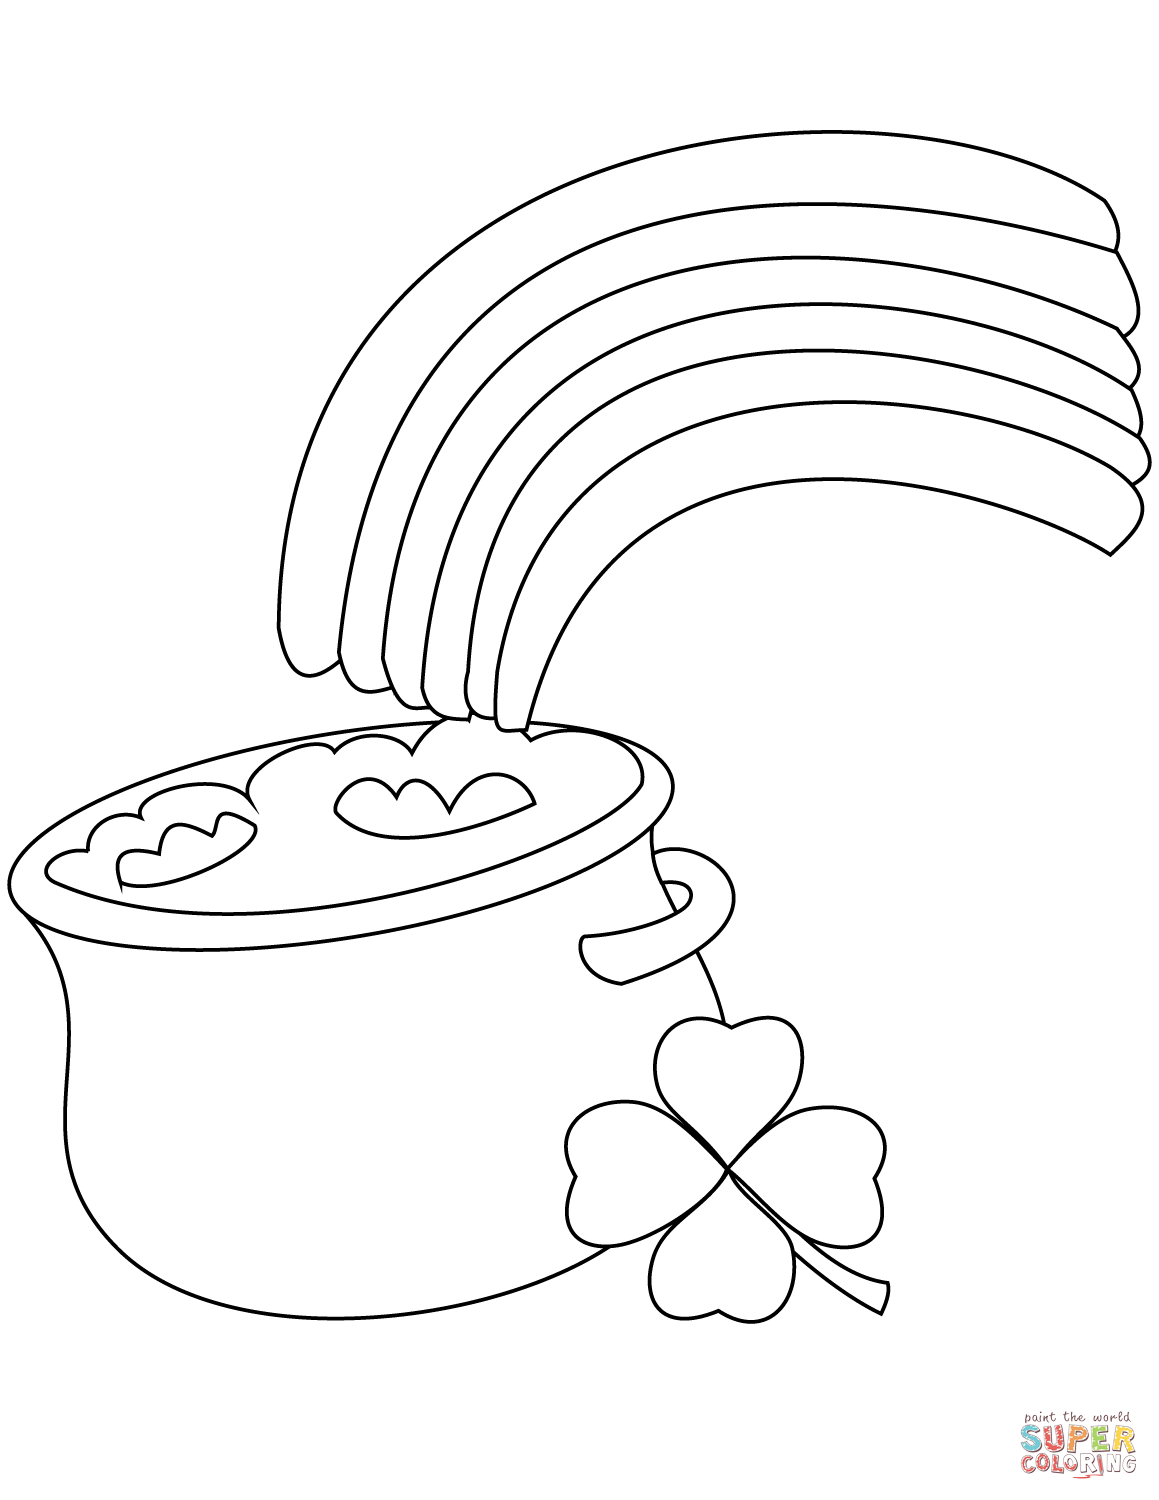 Rainbow And Pot Of Gold Coloring Page | Free Printable Coloring Pages - Pot Of Gold Template Free Printable